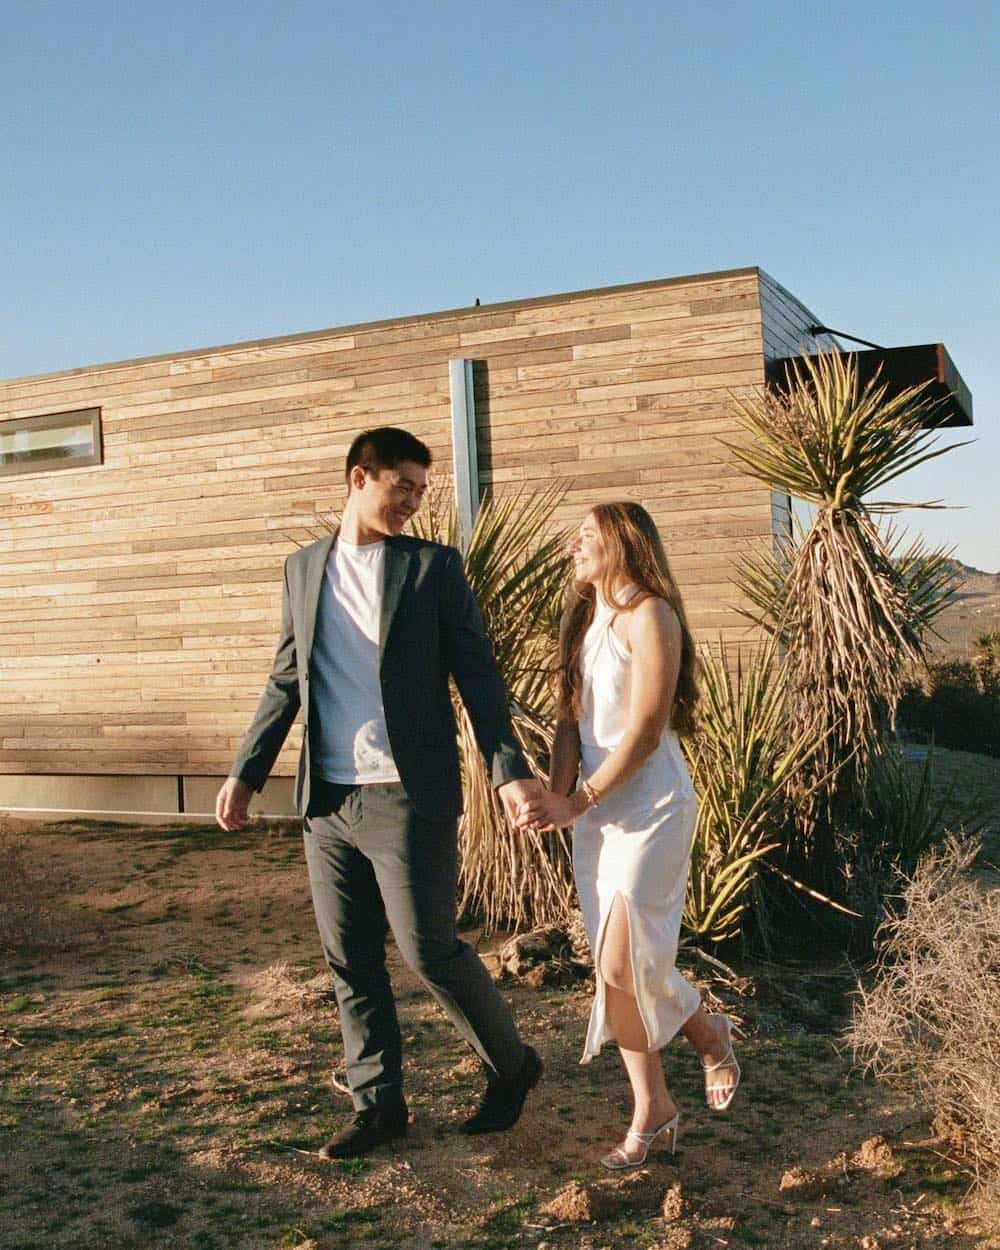 A couple's engagement photoshoot and the woman is wearing a slitted white halter top dress with white strappy heels, and the man is wearing matching black pants and blazer with a white tee